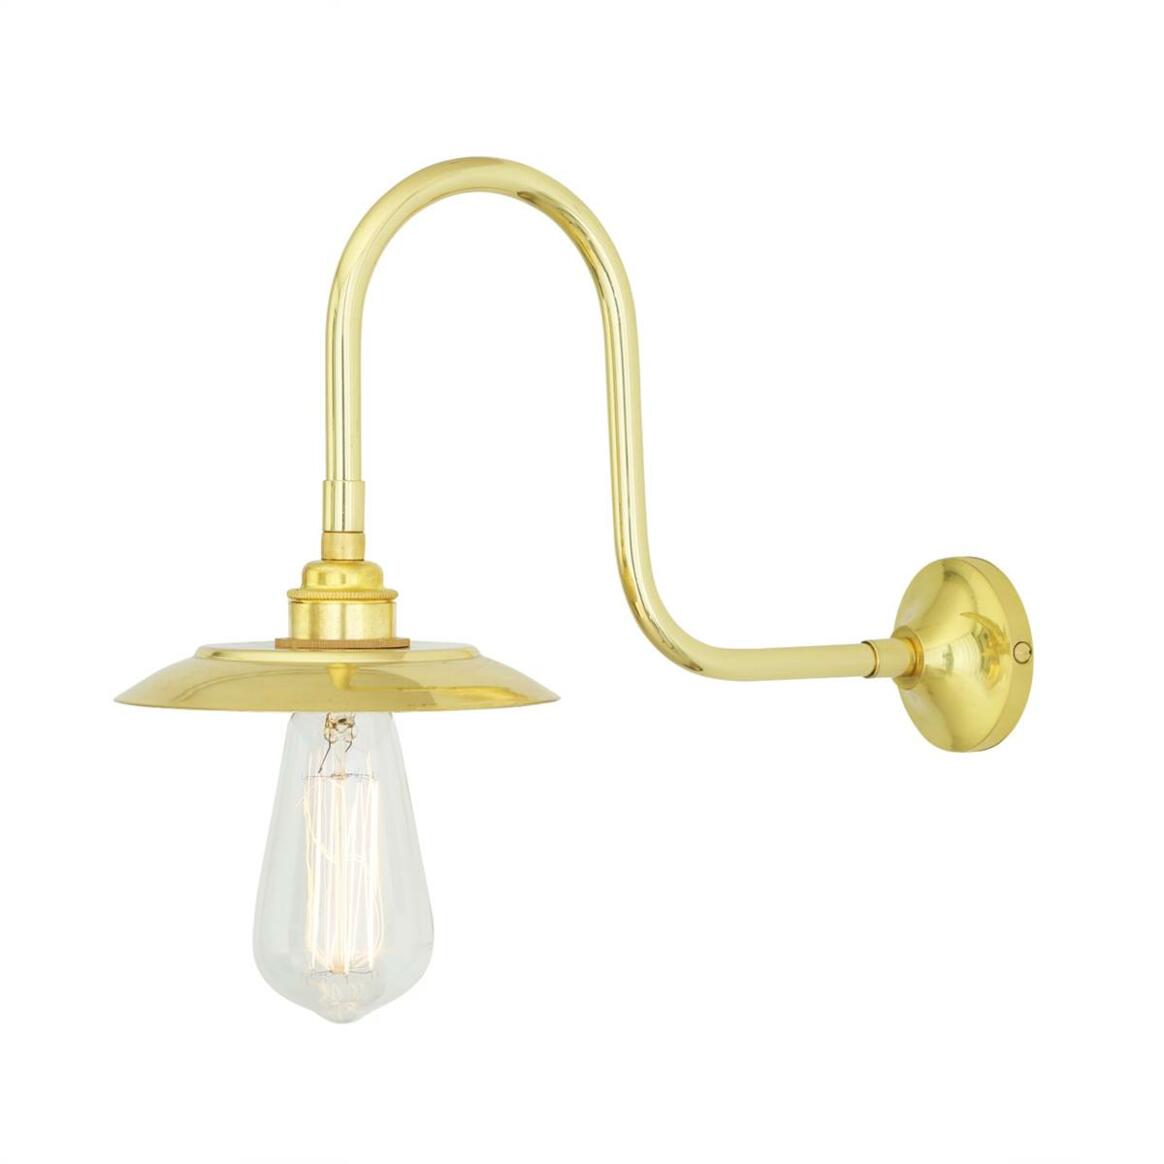 Reznor Vintage Swan Neck Wall Light with Brass Shade main product image